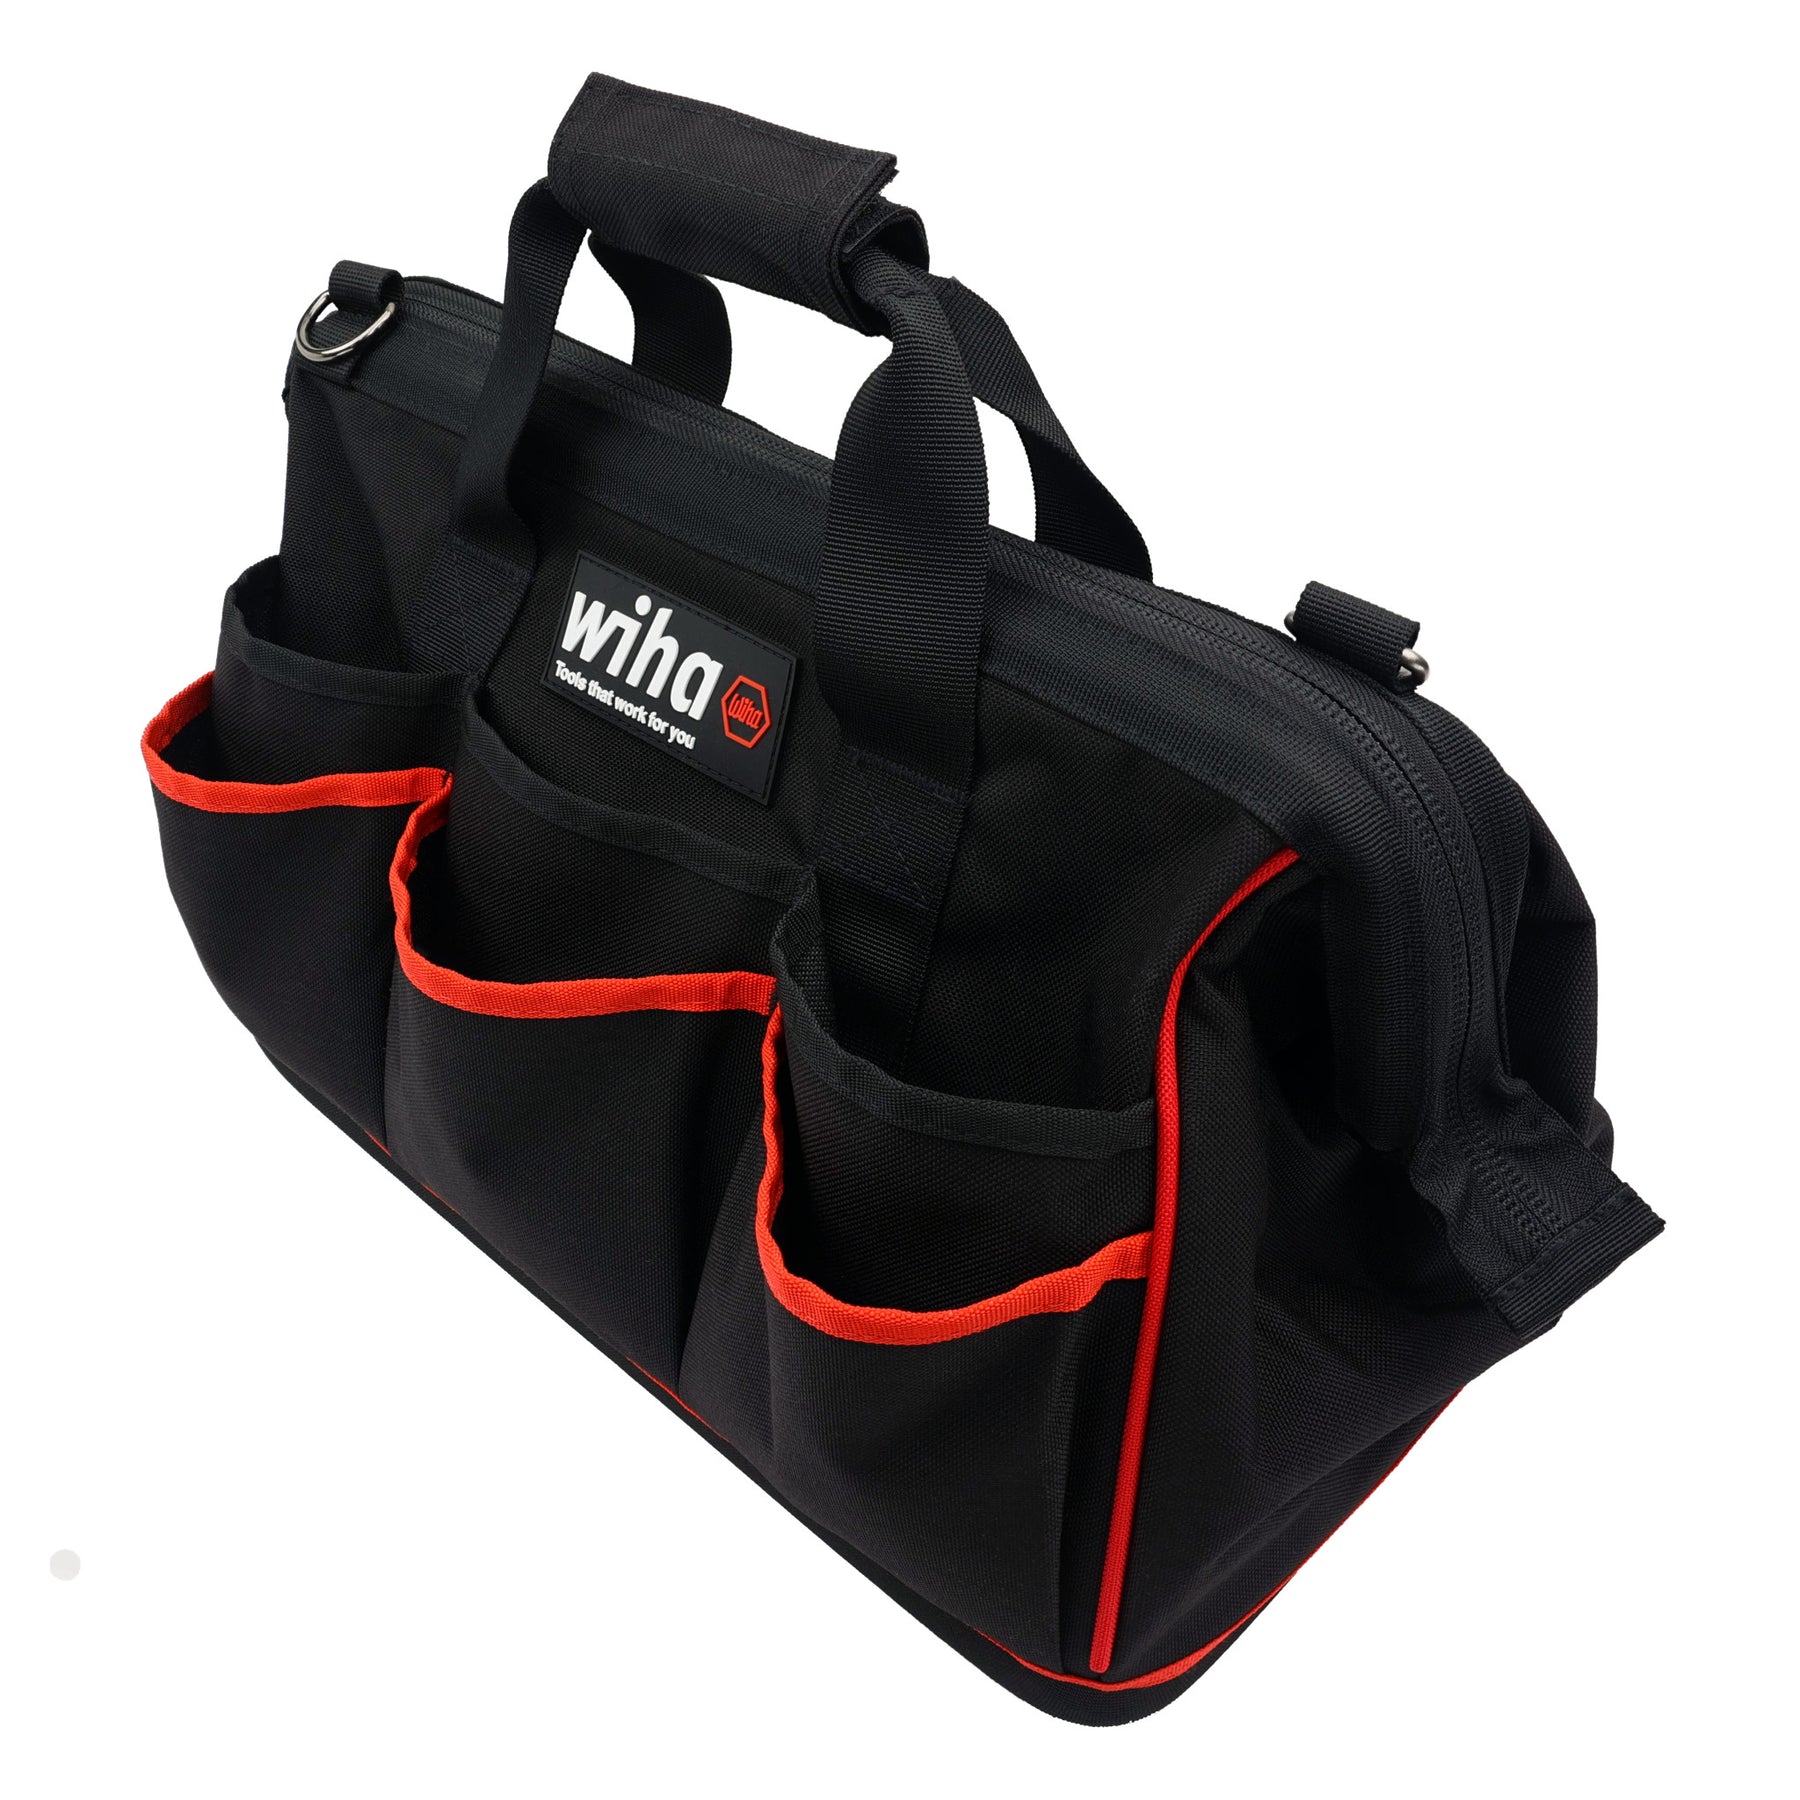 PAHAL Canvas Green Tool Bag Electrician, Technician, Service Engineer,  Mechanic, Plumber at Rs 744/piece | Tool Kit Bags in Jalandhar | ID:  23280410855